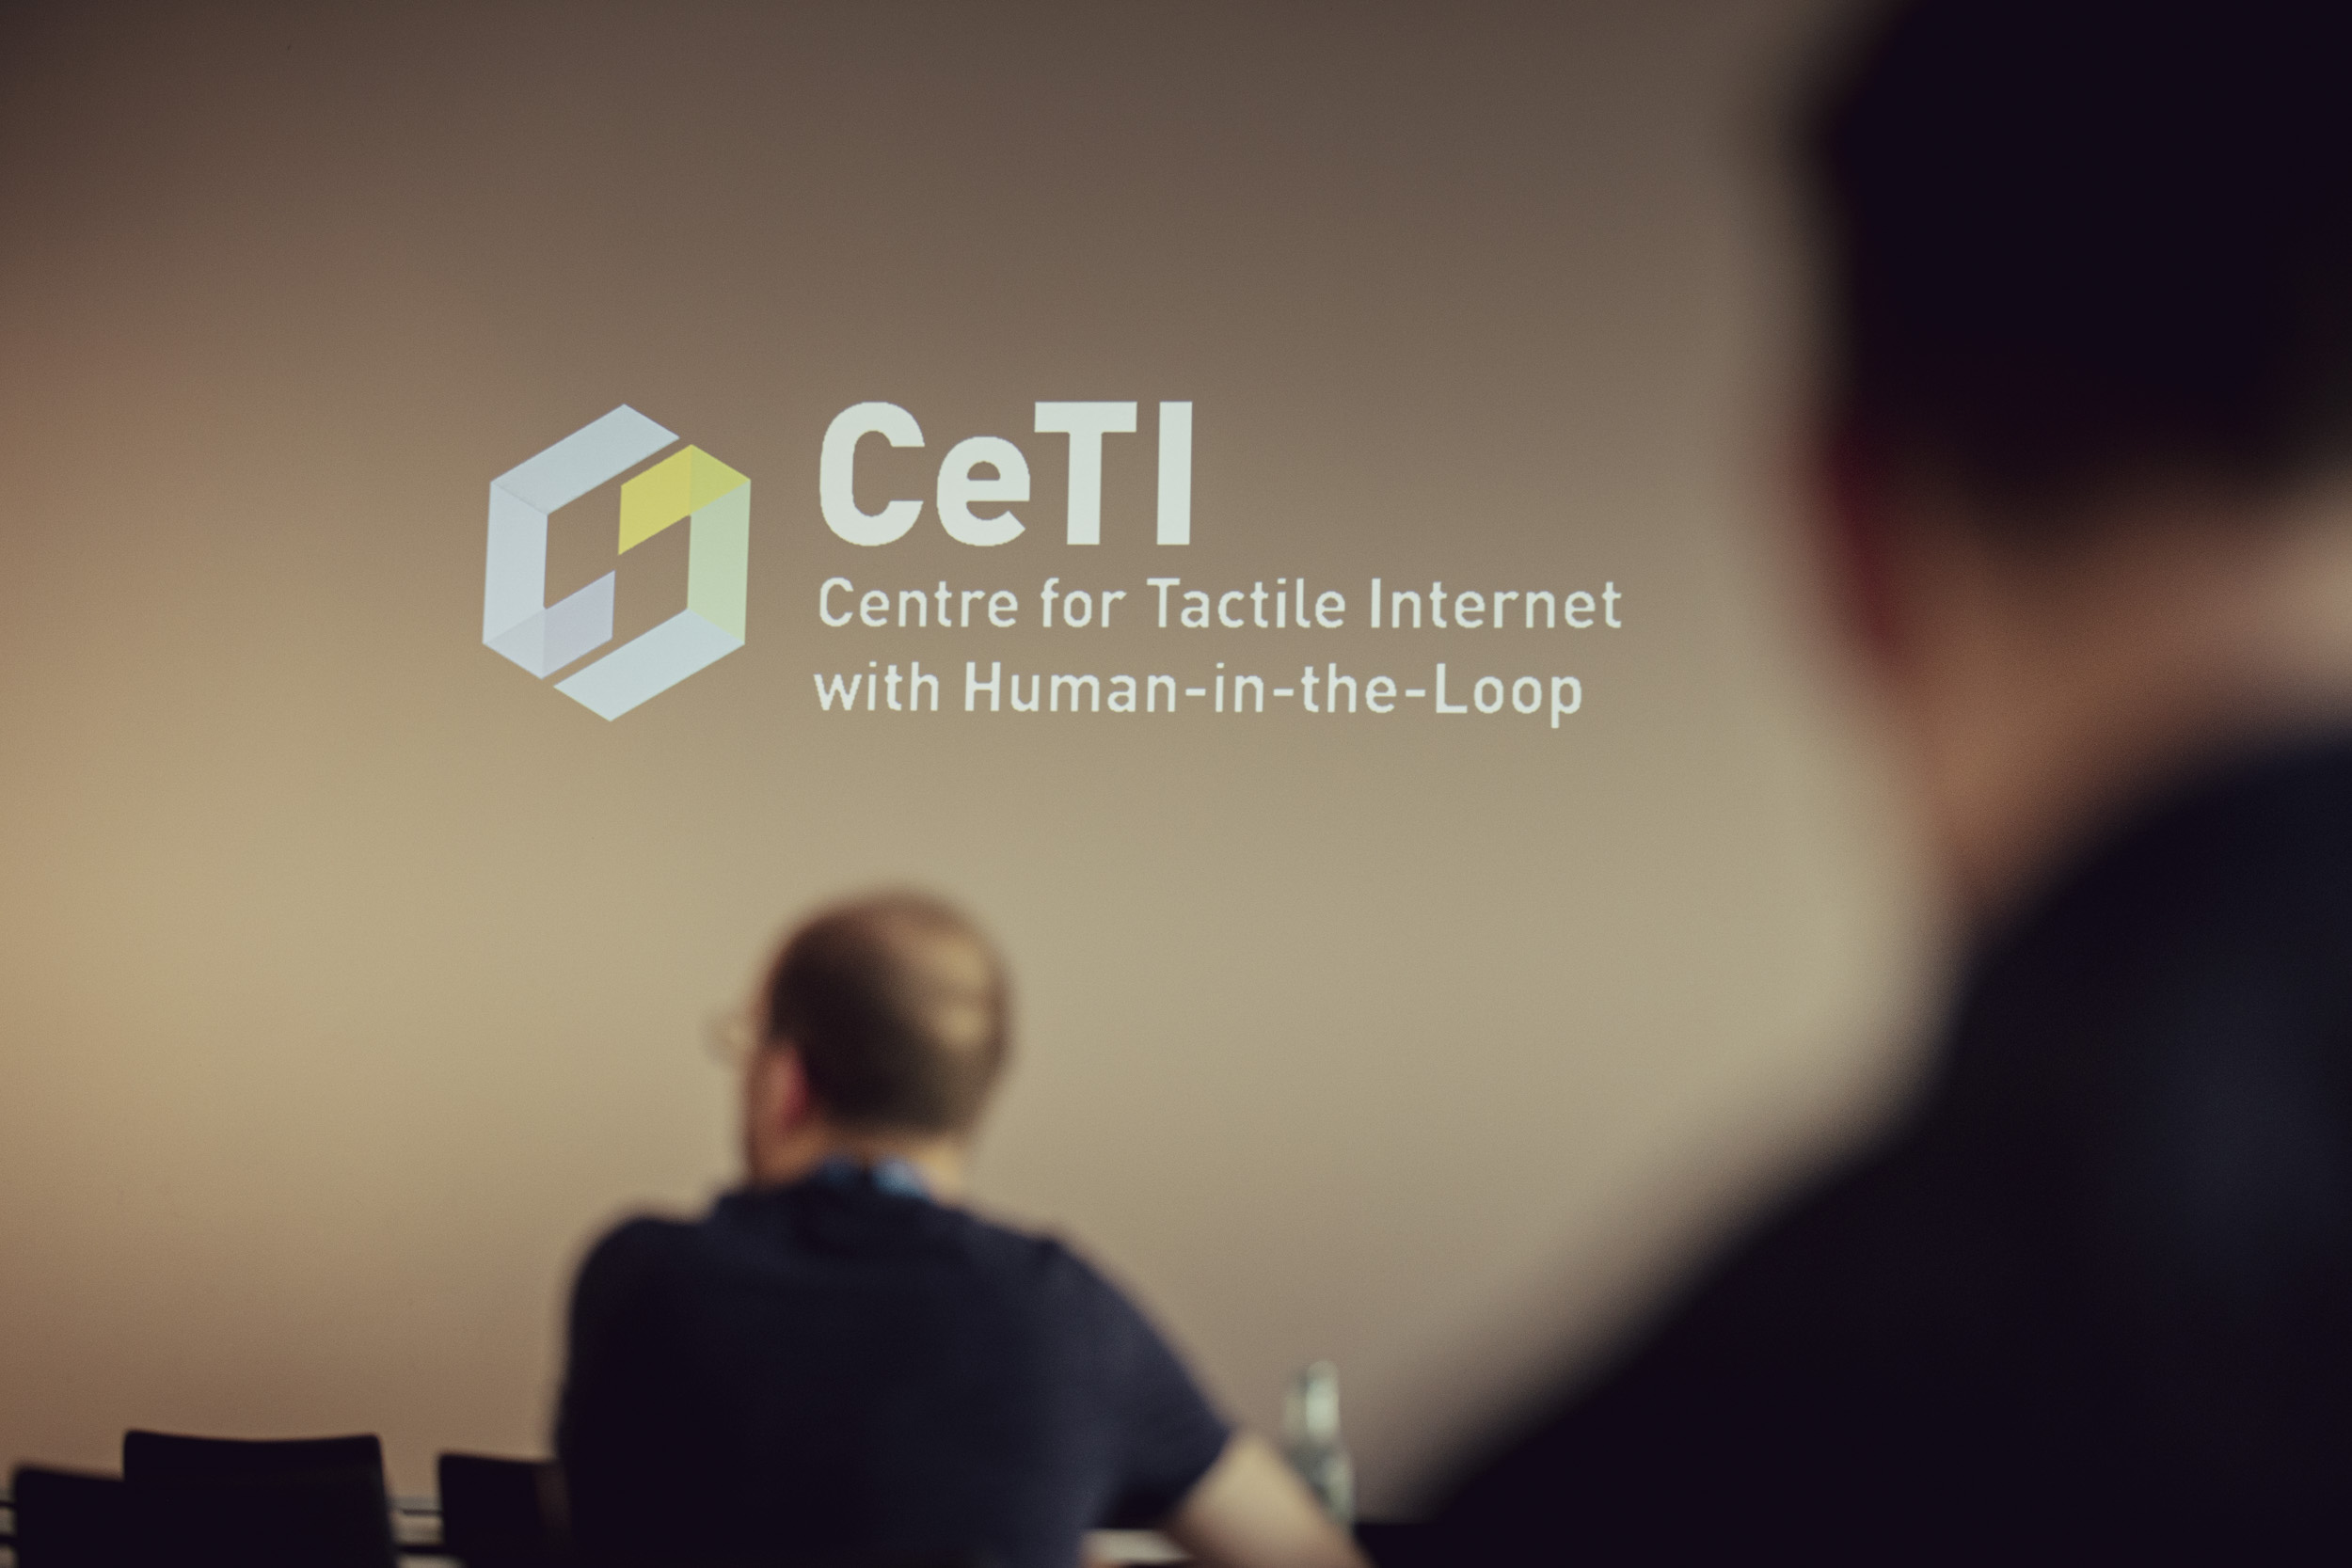 Photograph of projection onto a wall with writing''CeTI Centre for Tactile Internet with human-in-the-Loop" with two people visible from behind